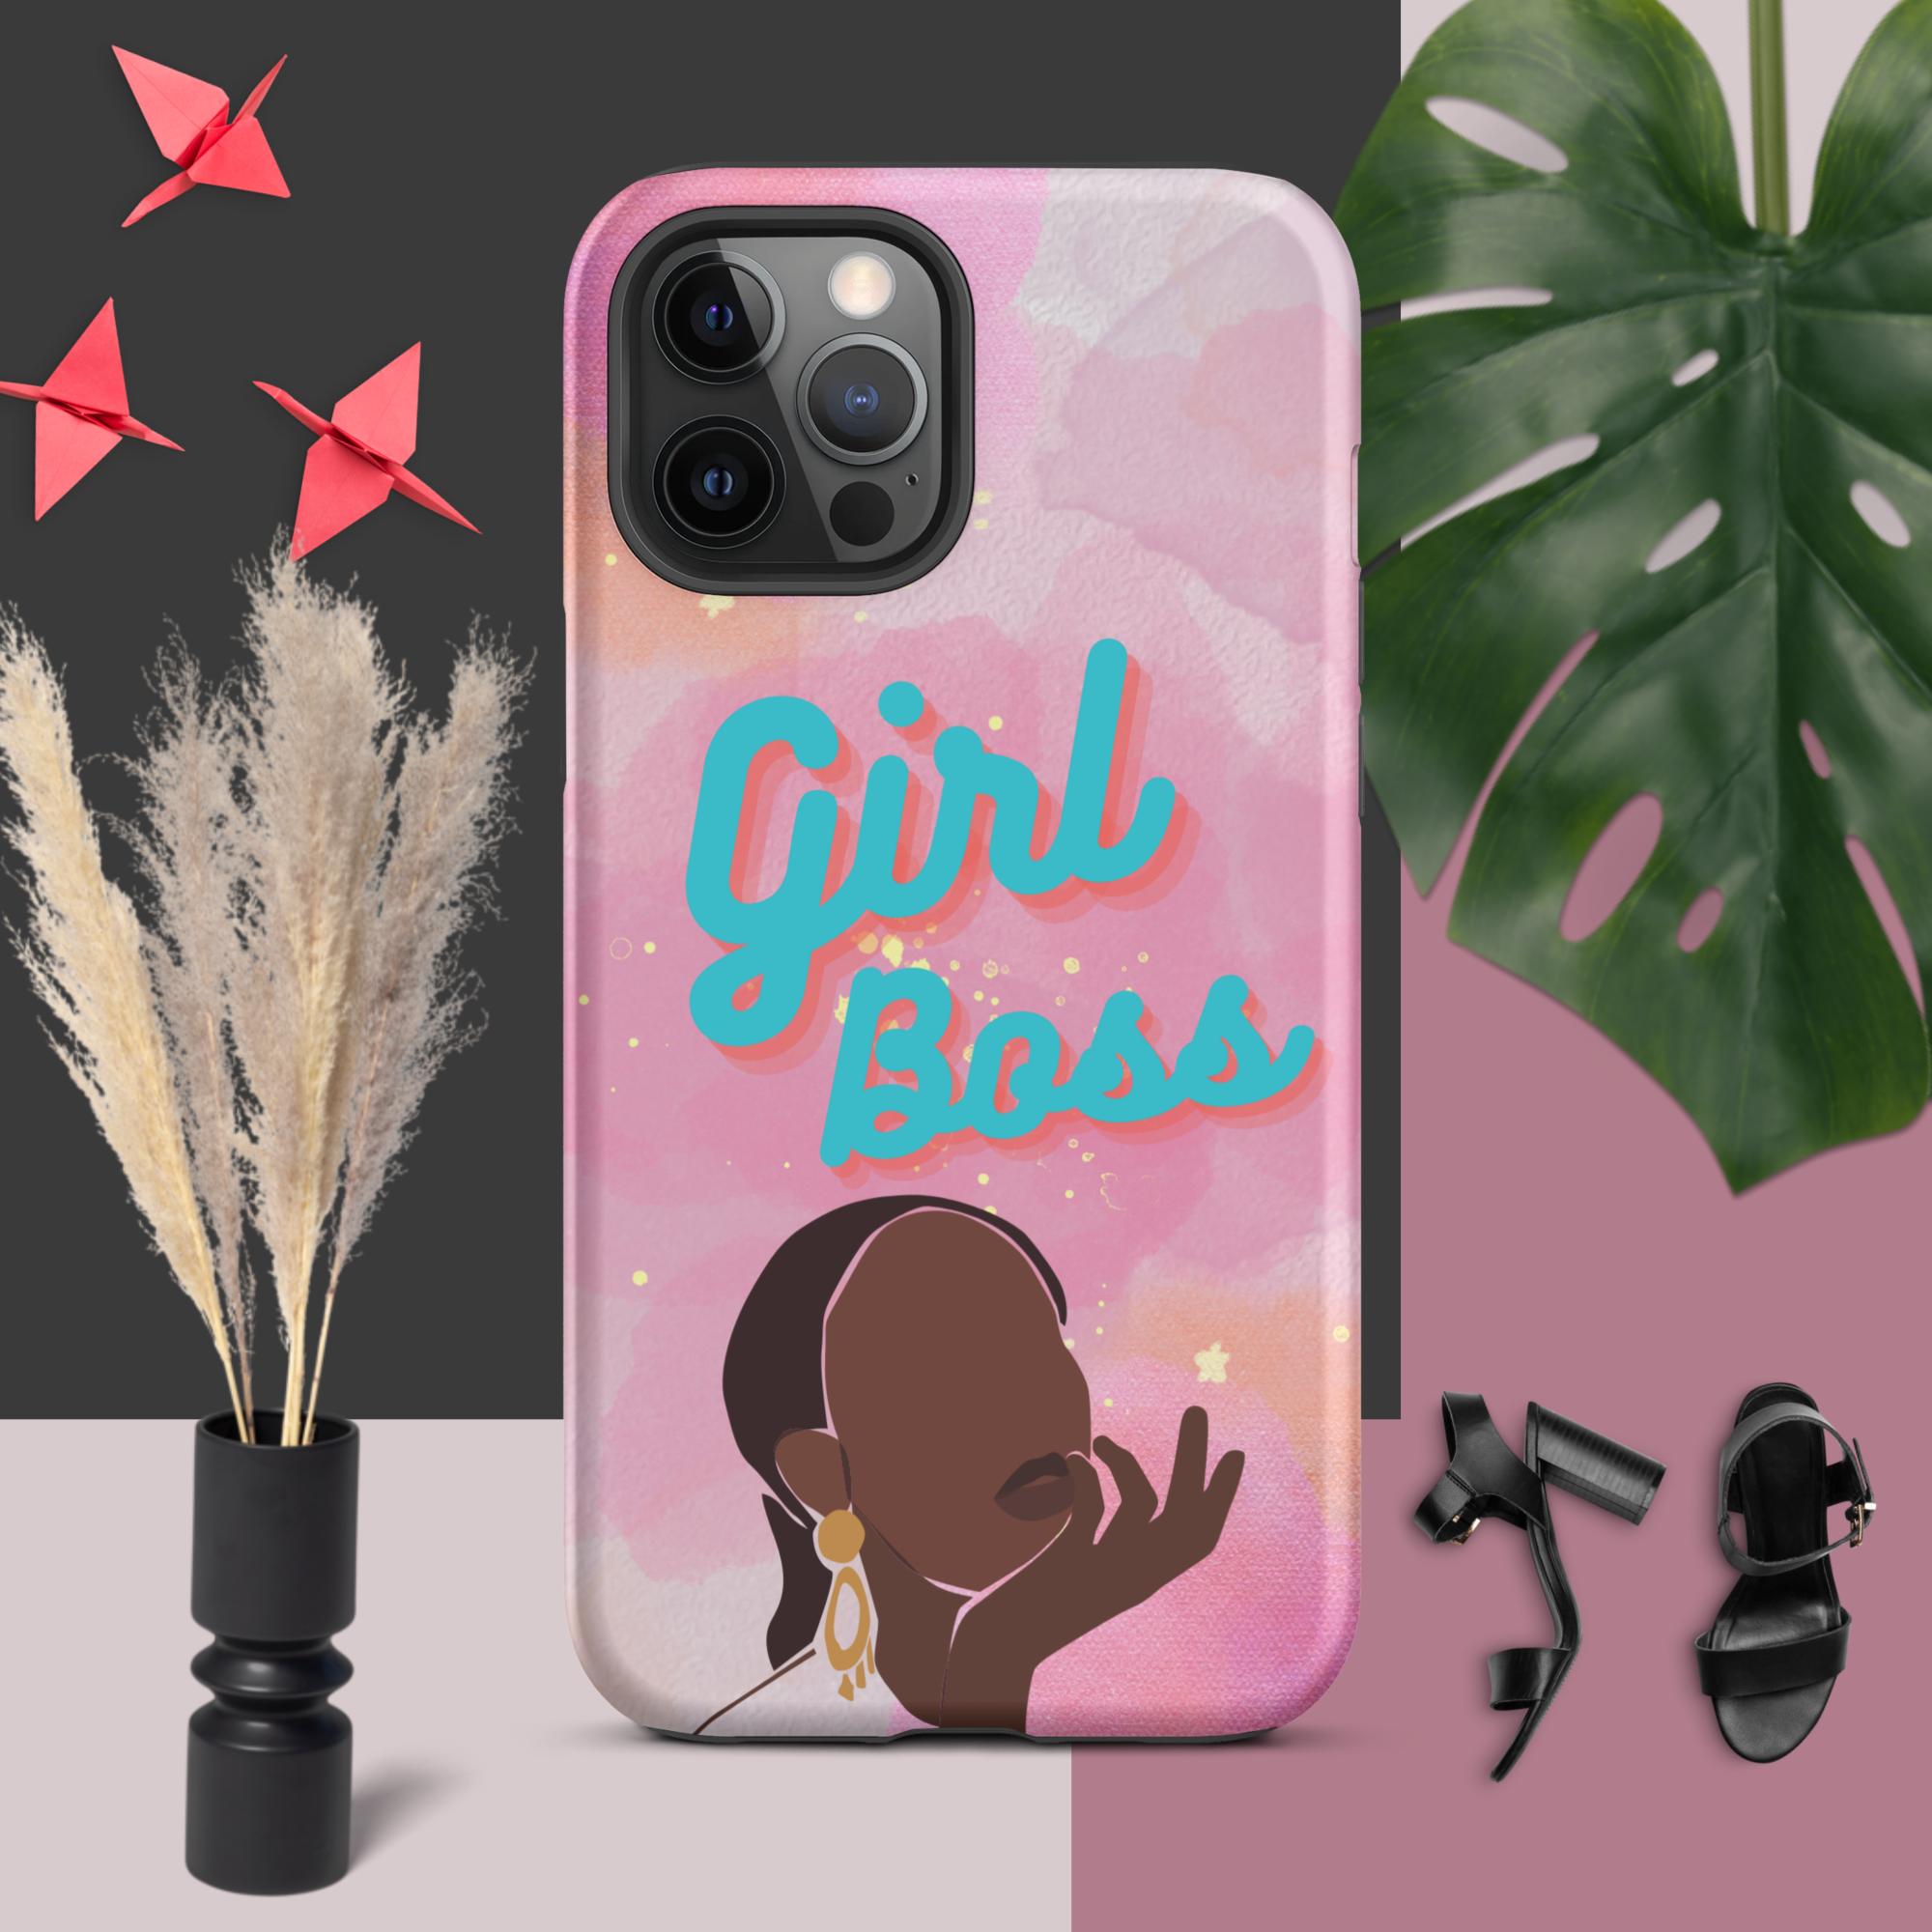 She is a Boss -Iphone Case